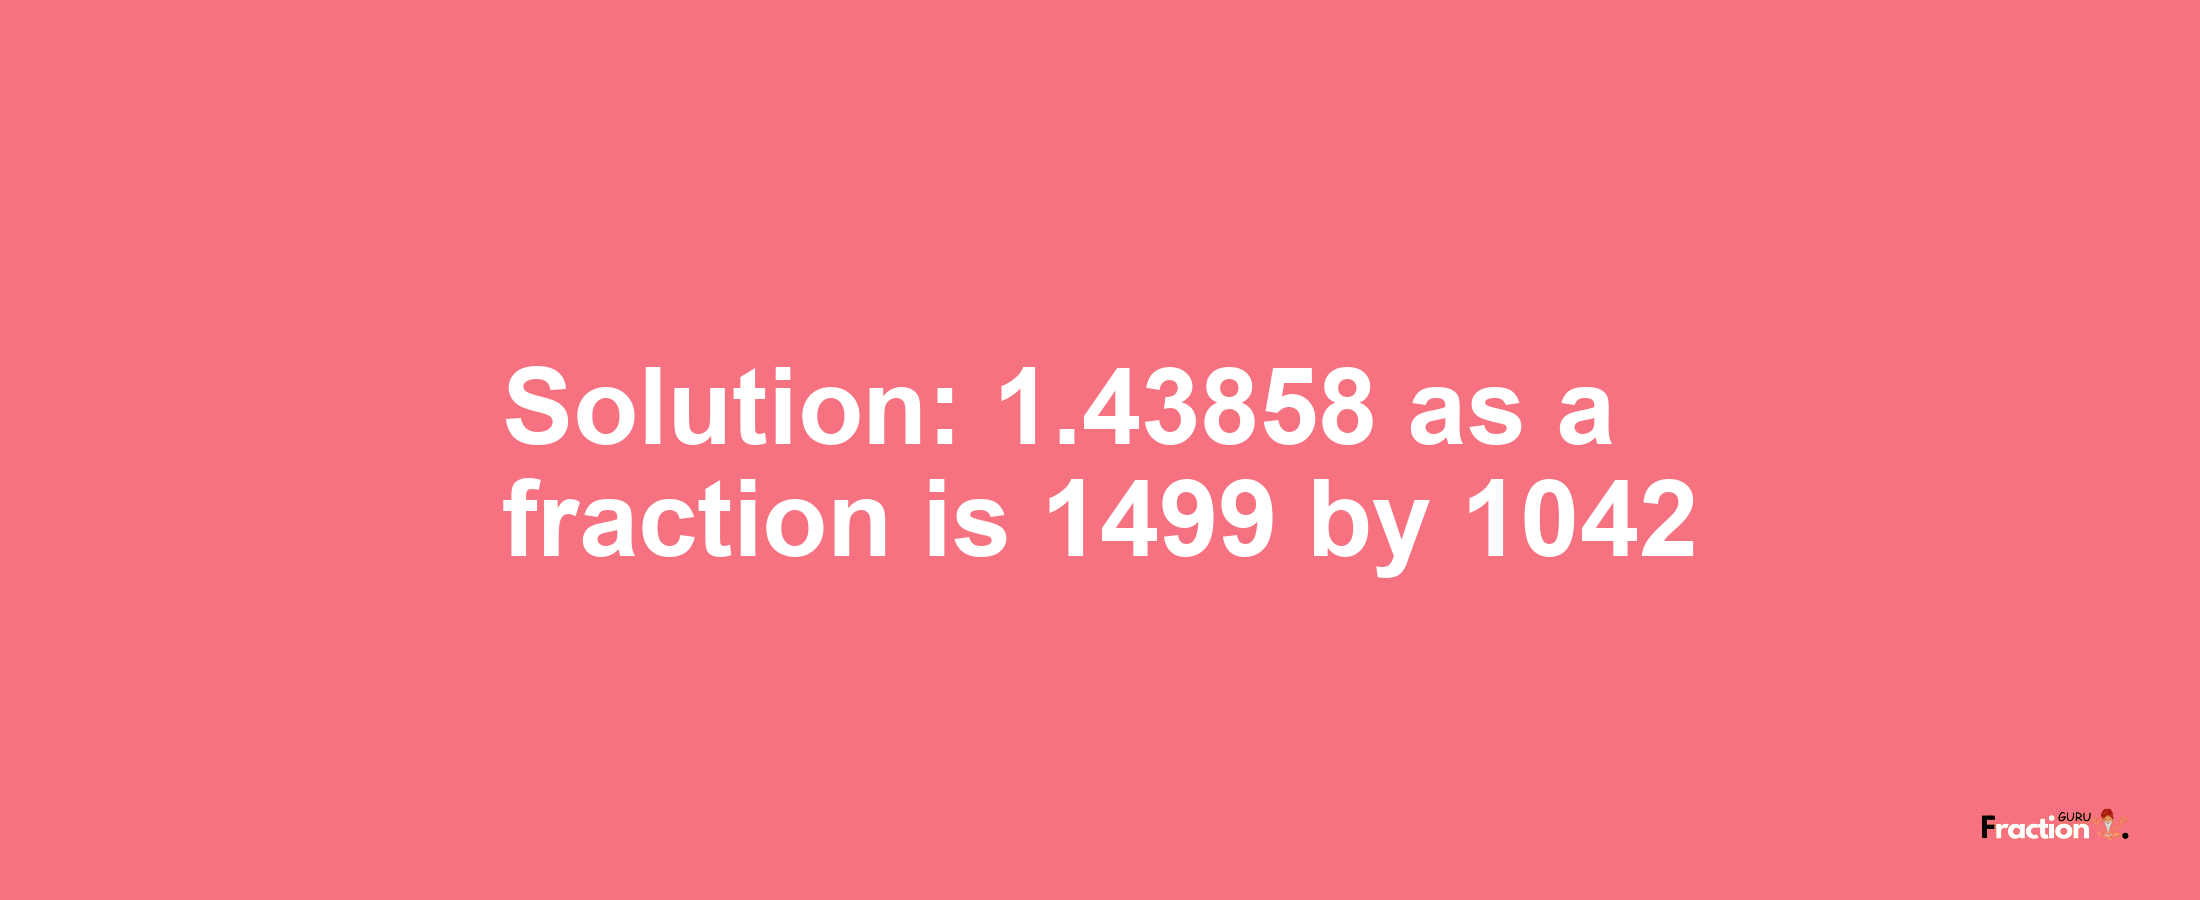 Solution:1.43858 as a fraction is 1499/1042